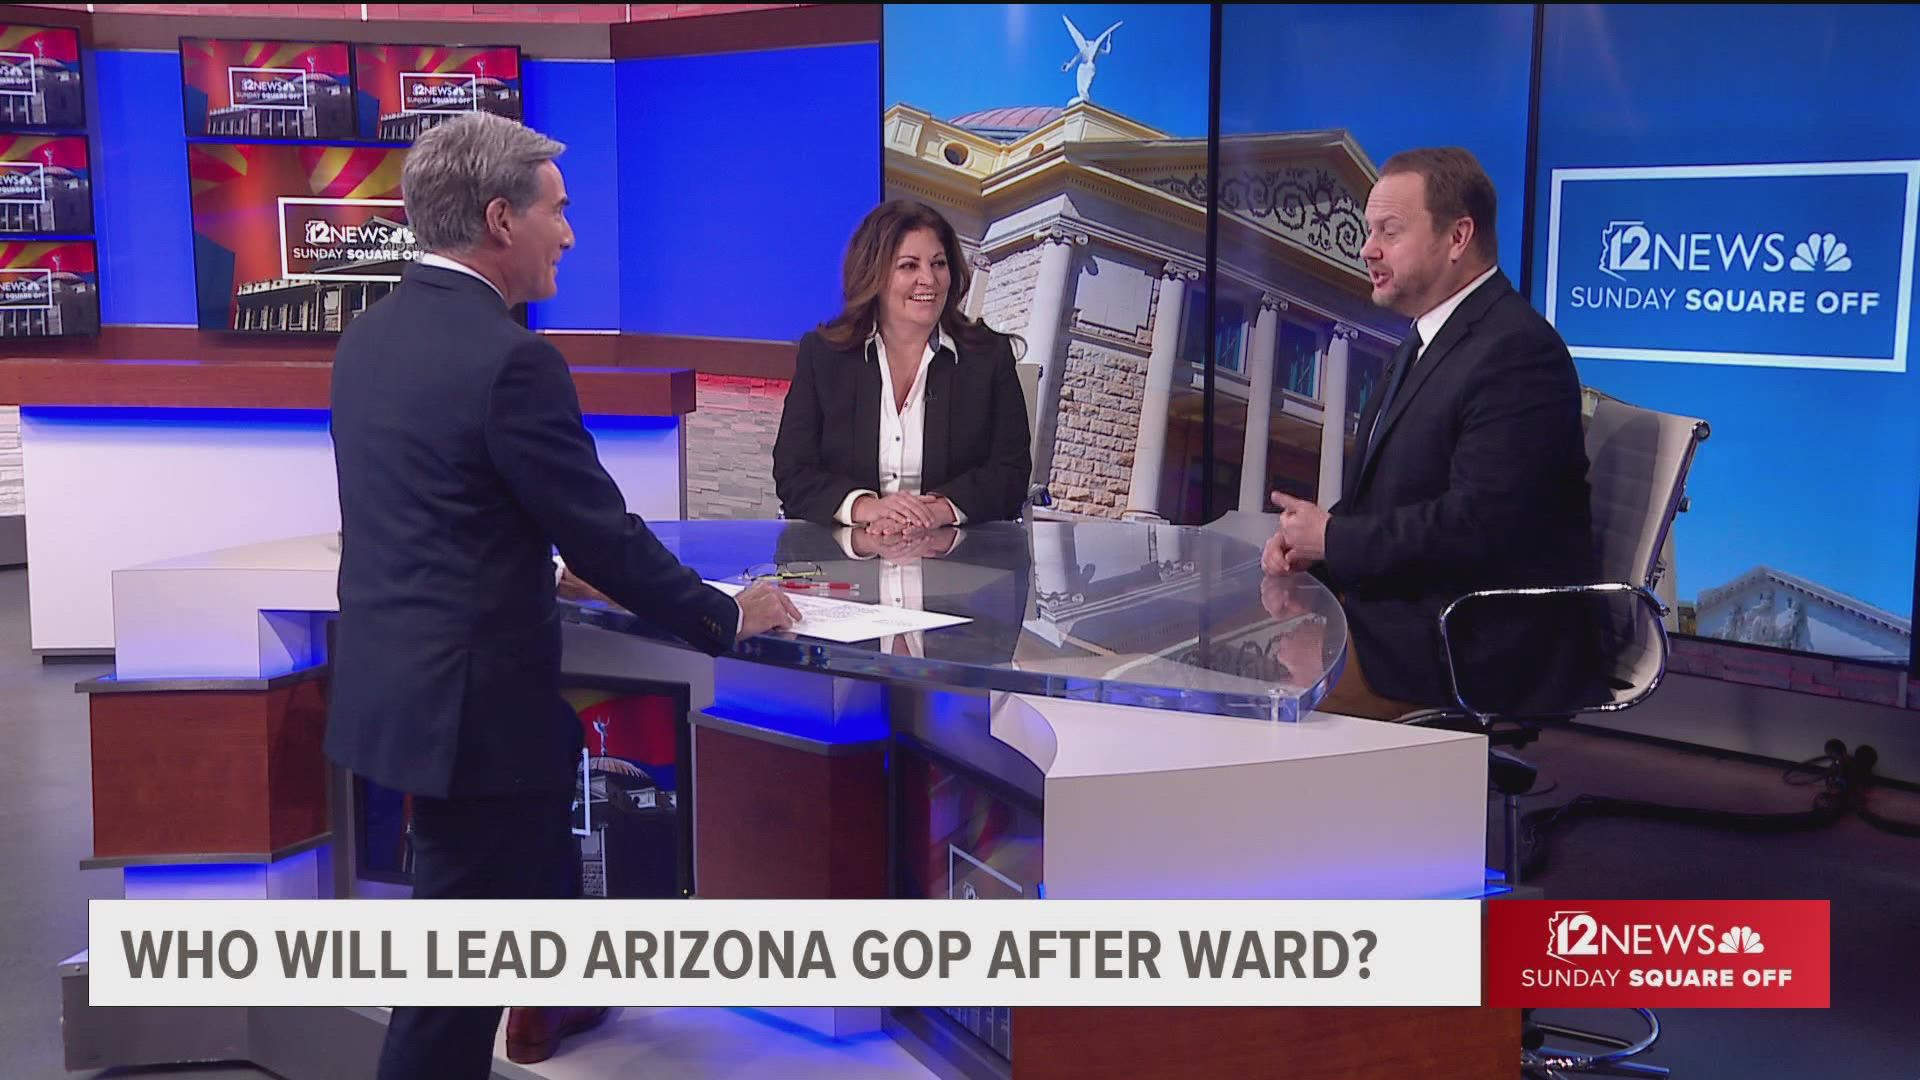 Kelli Ward leaves the chairmanship of the Arizona Republican Party. Rep. Ruben Gallego said he'd announce his decision of running for the U.S. Senate in the new year